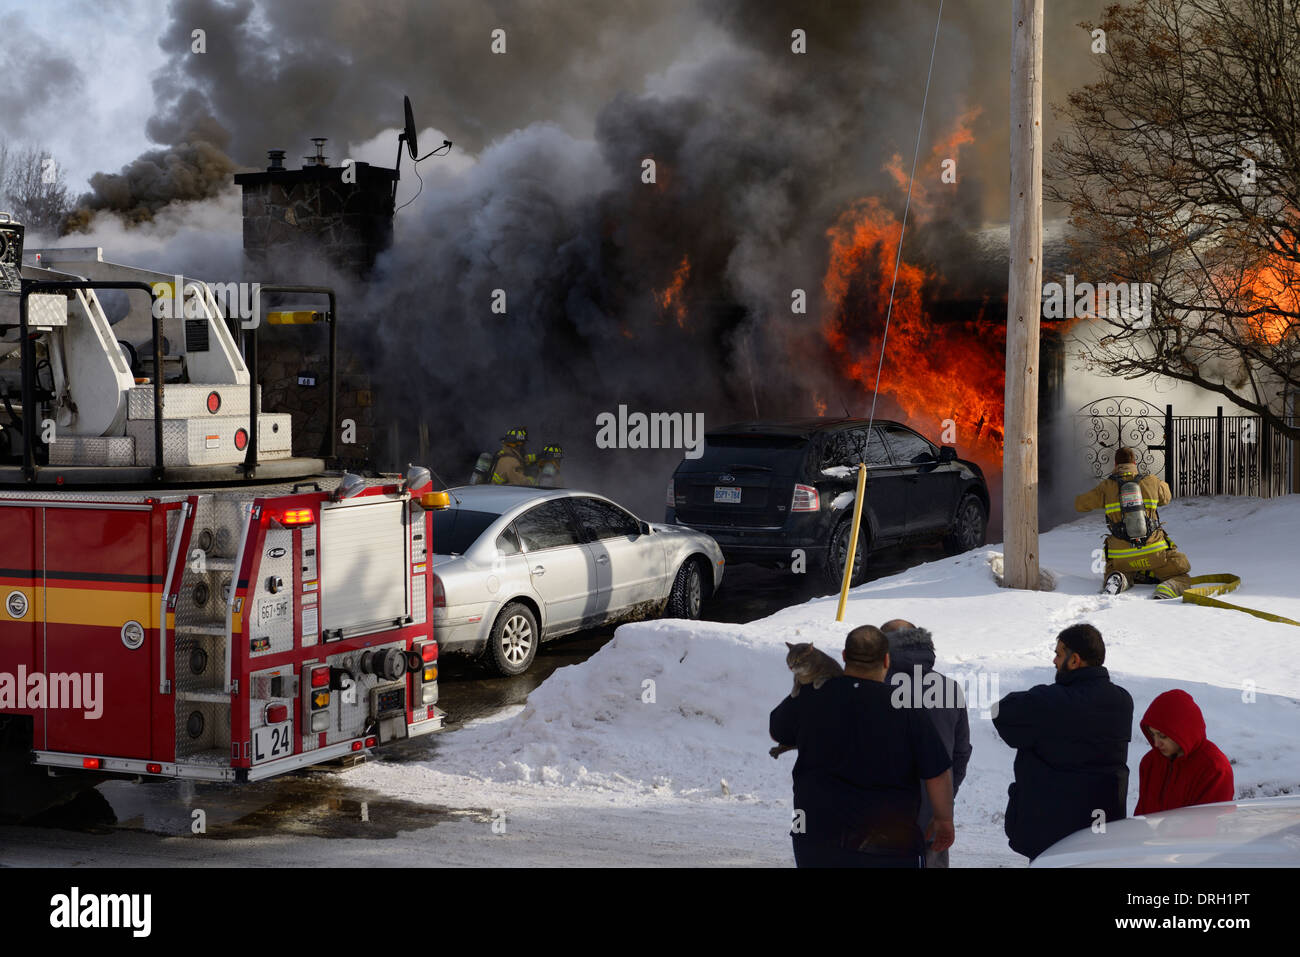 Family outside in winter watching while house goes up in flames with firefighters spraying water to knock down the blazing structural fire Ottawa Stock Photo